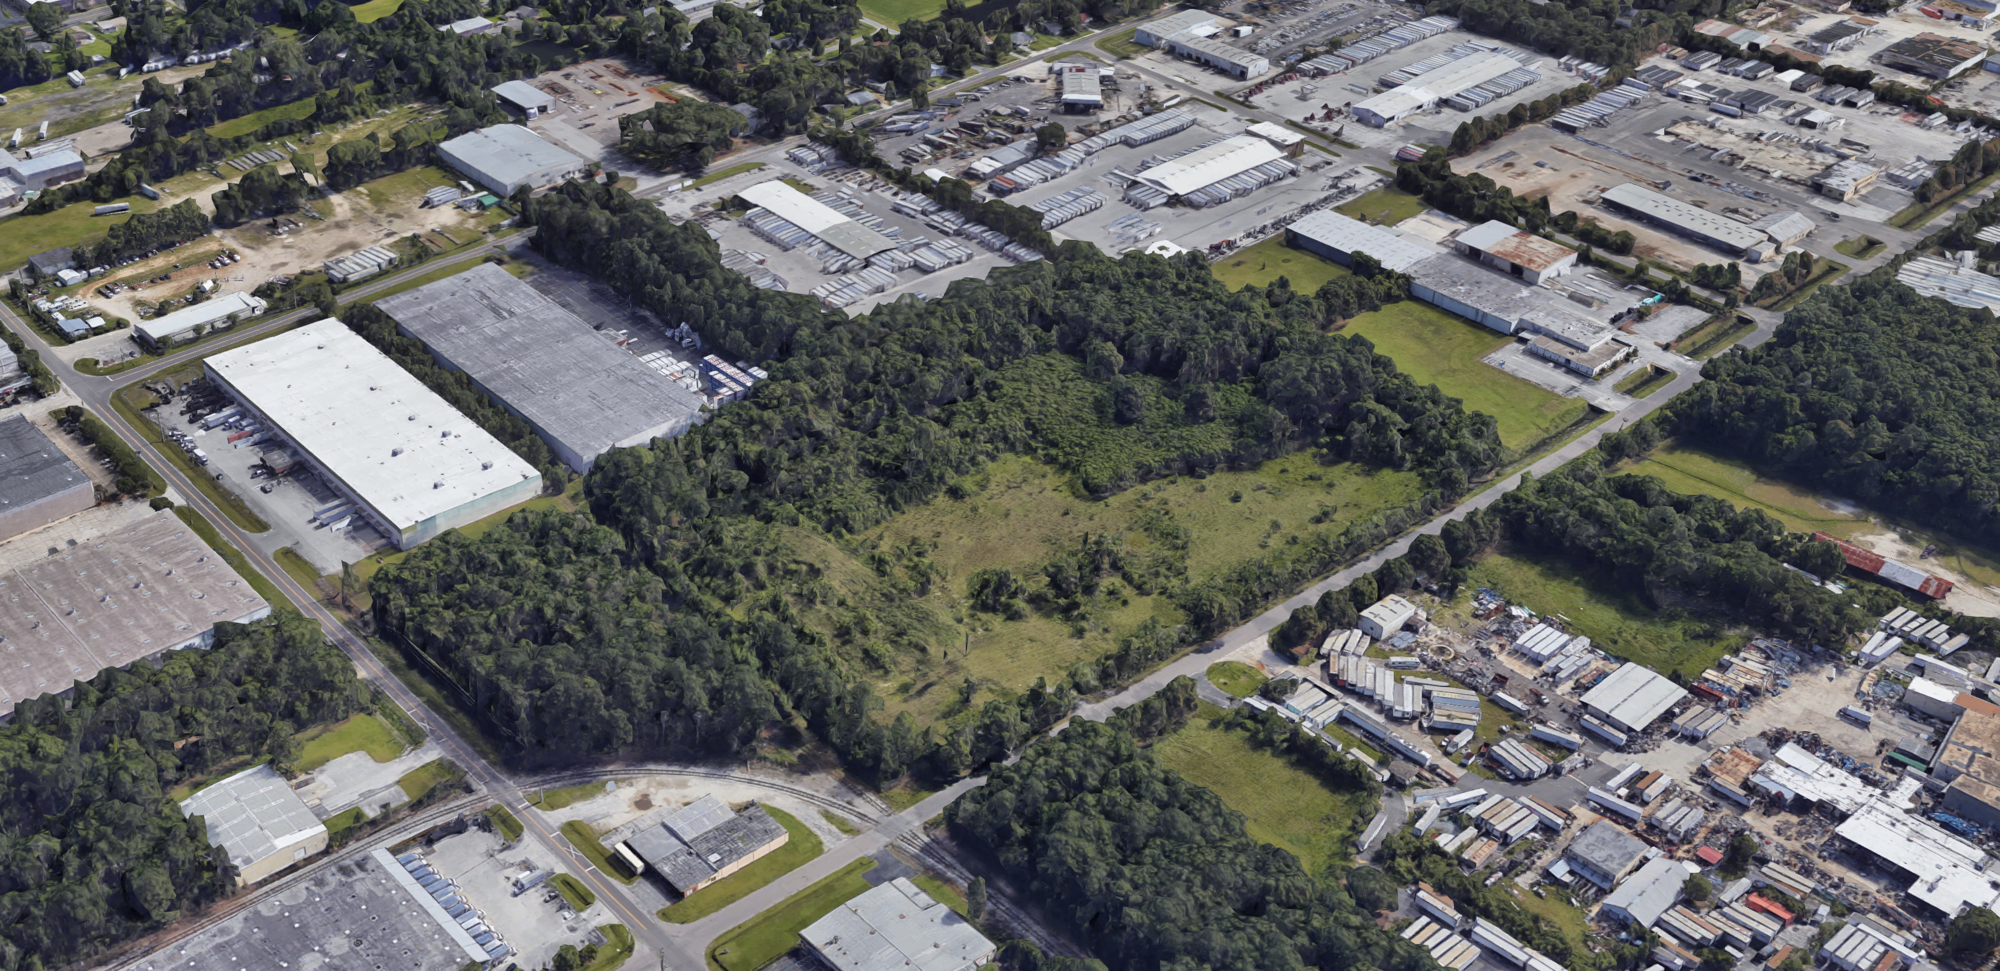 A 222,834-square-foot cold-storage facility is planned for 5459 Doolittle Road. (Google)